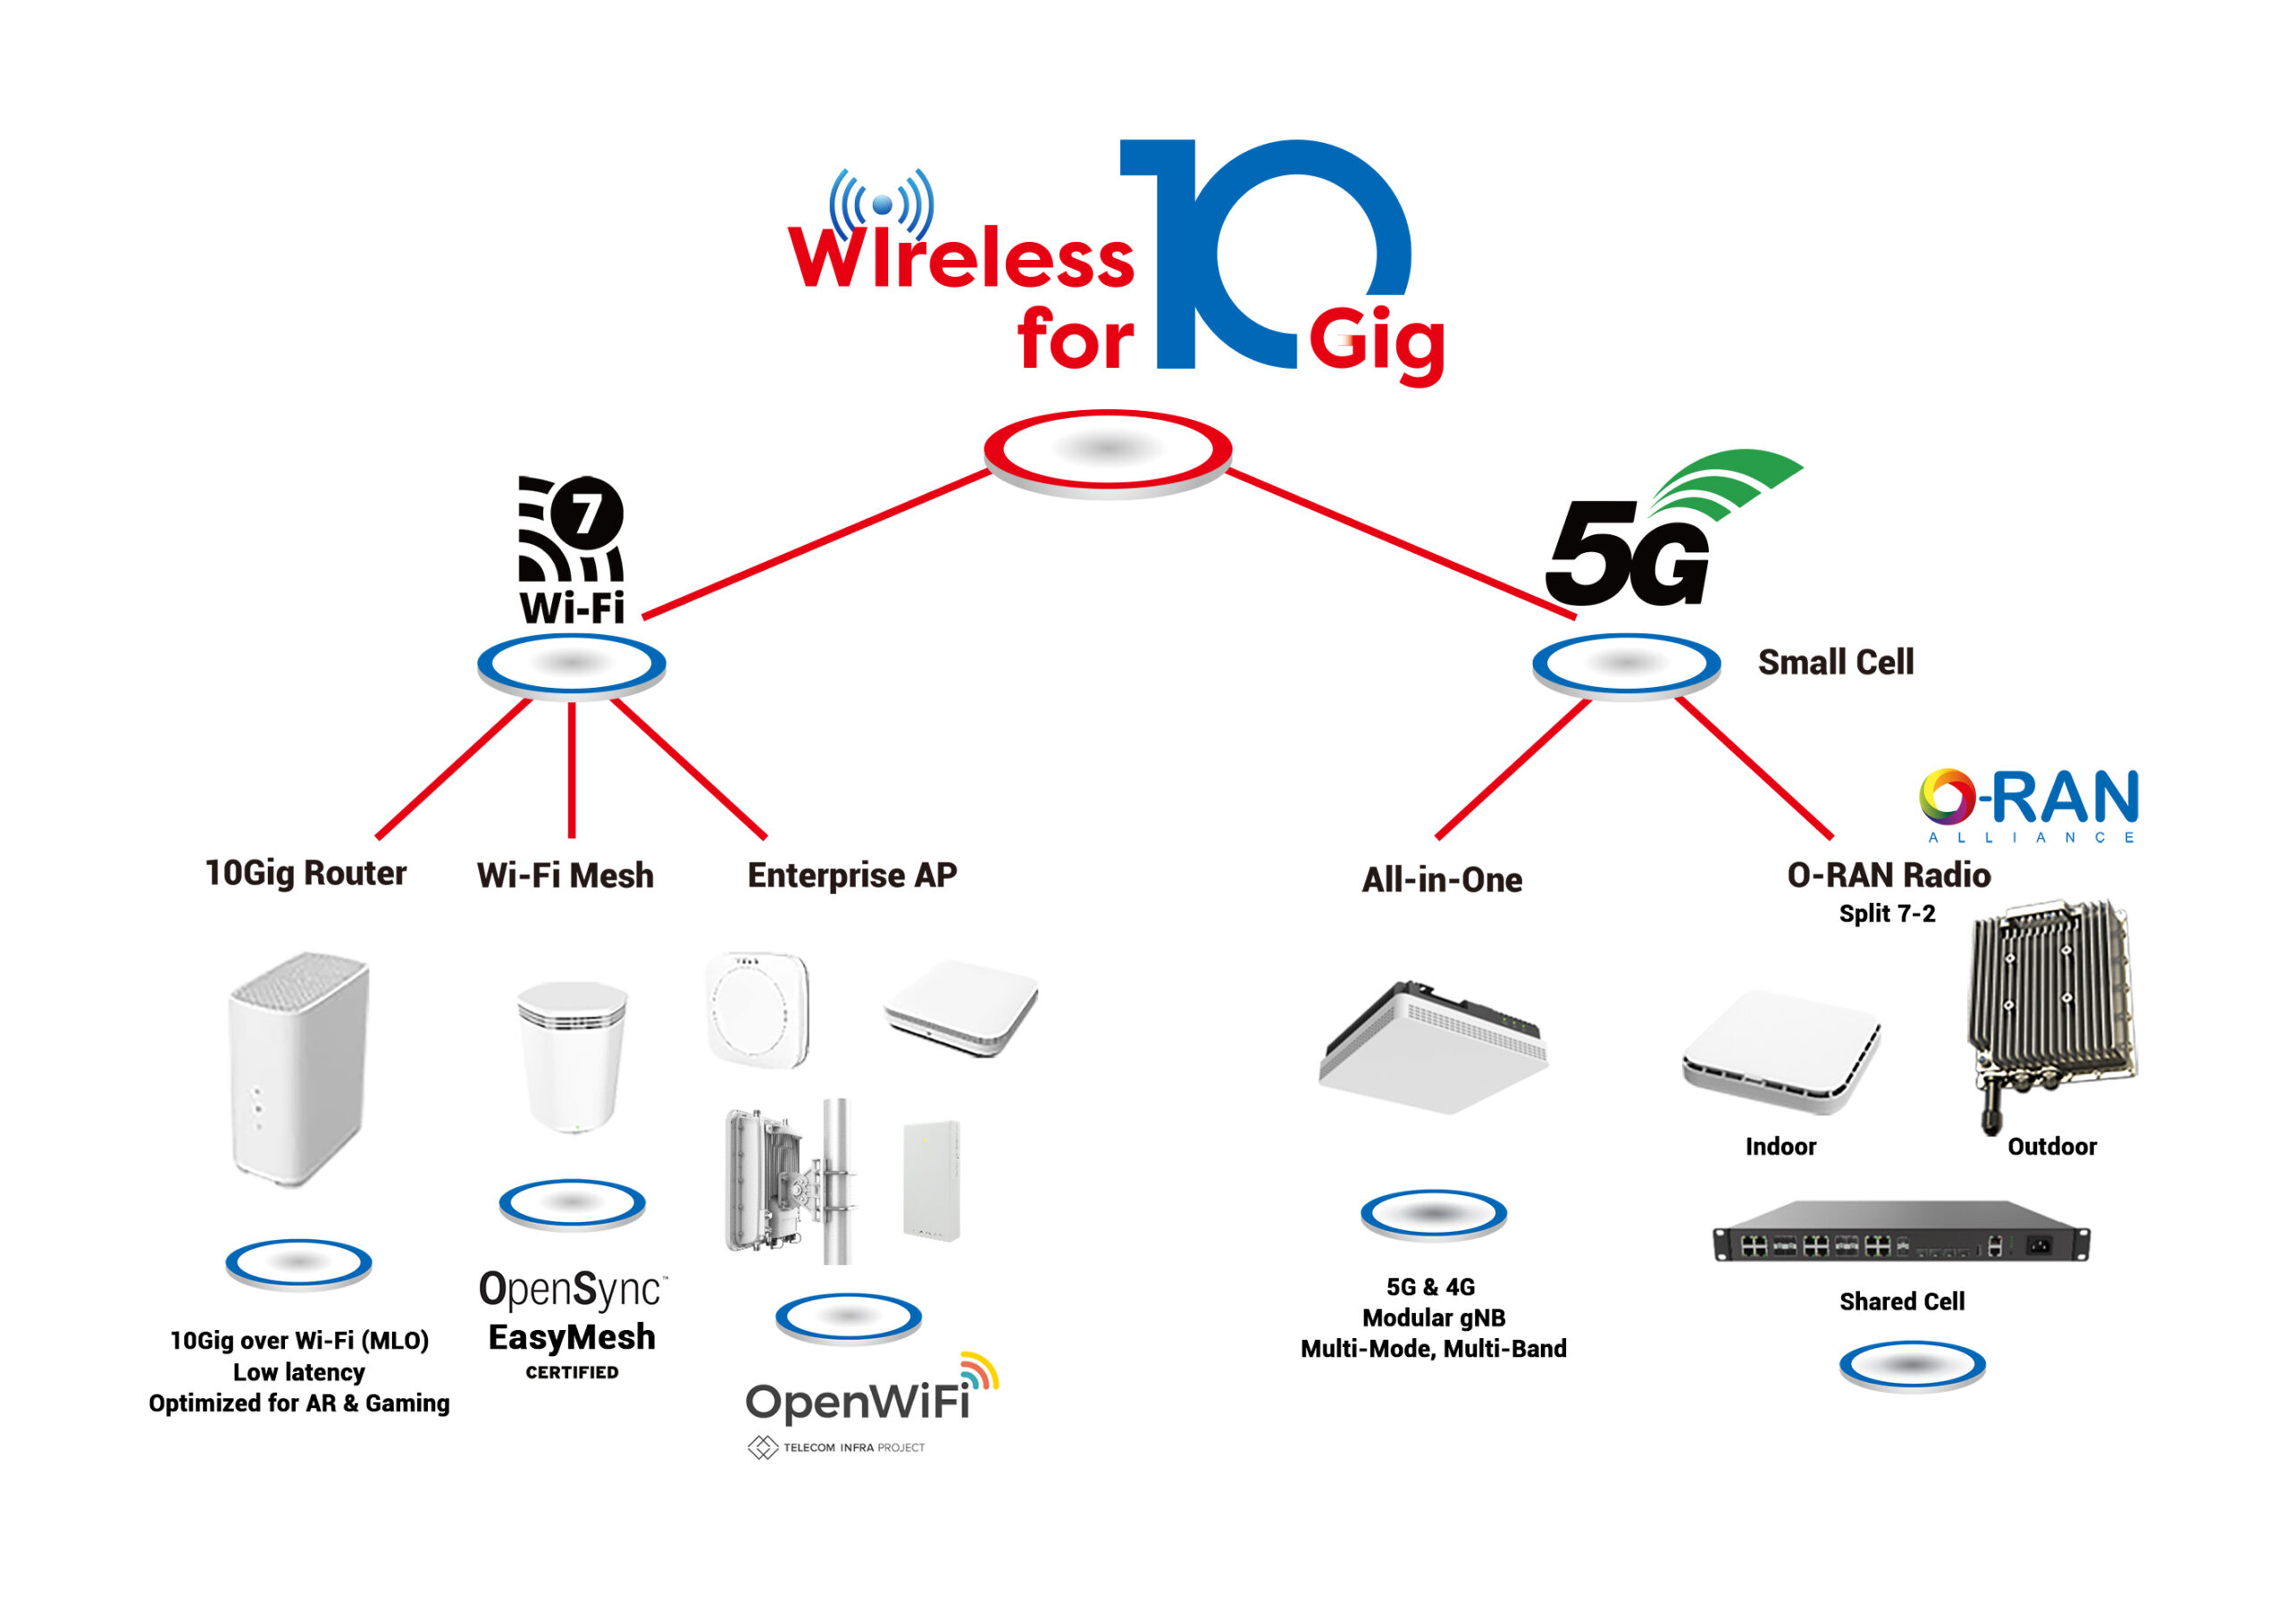 Wireless for 10Gig